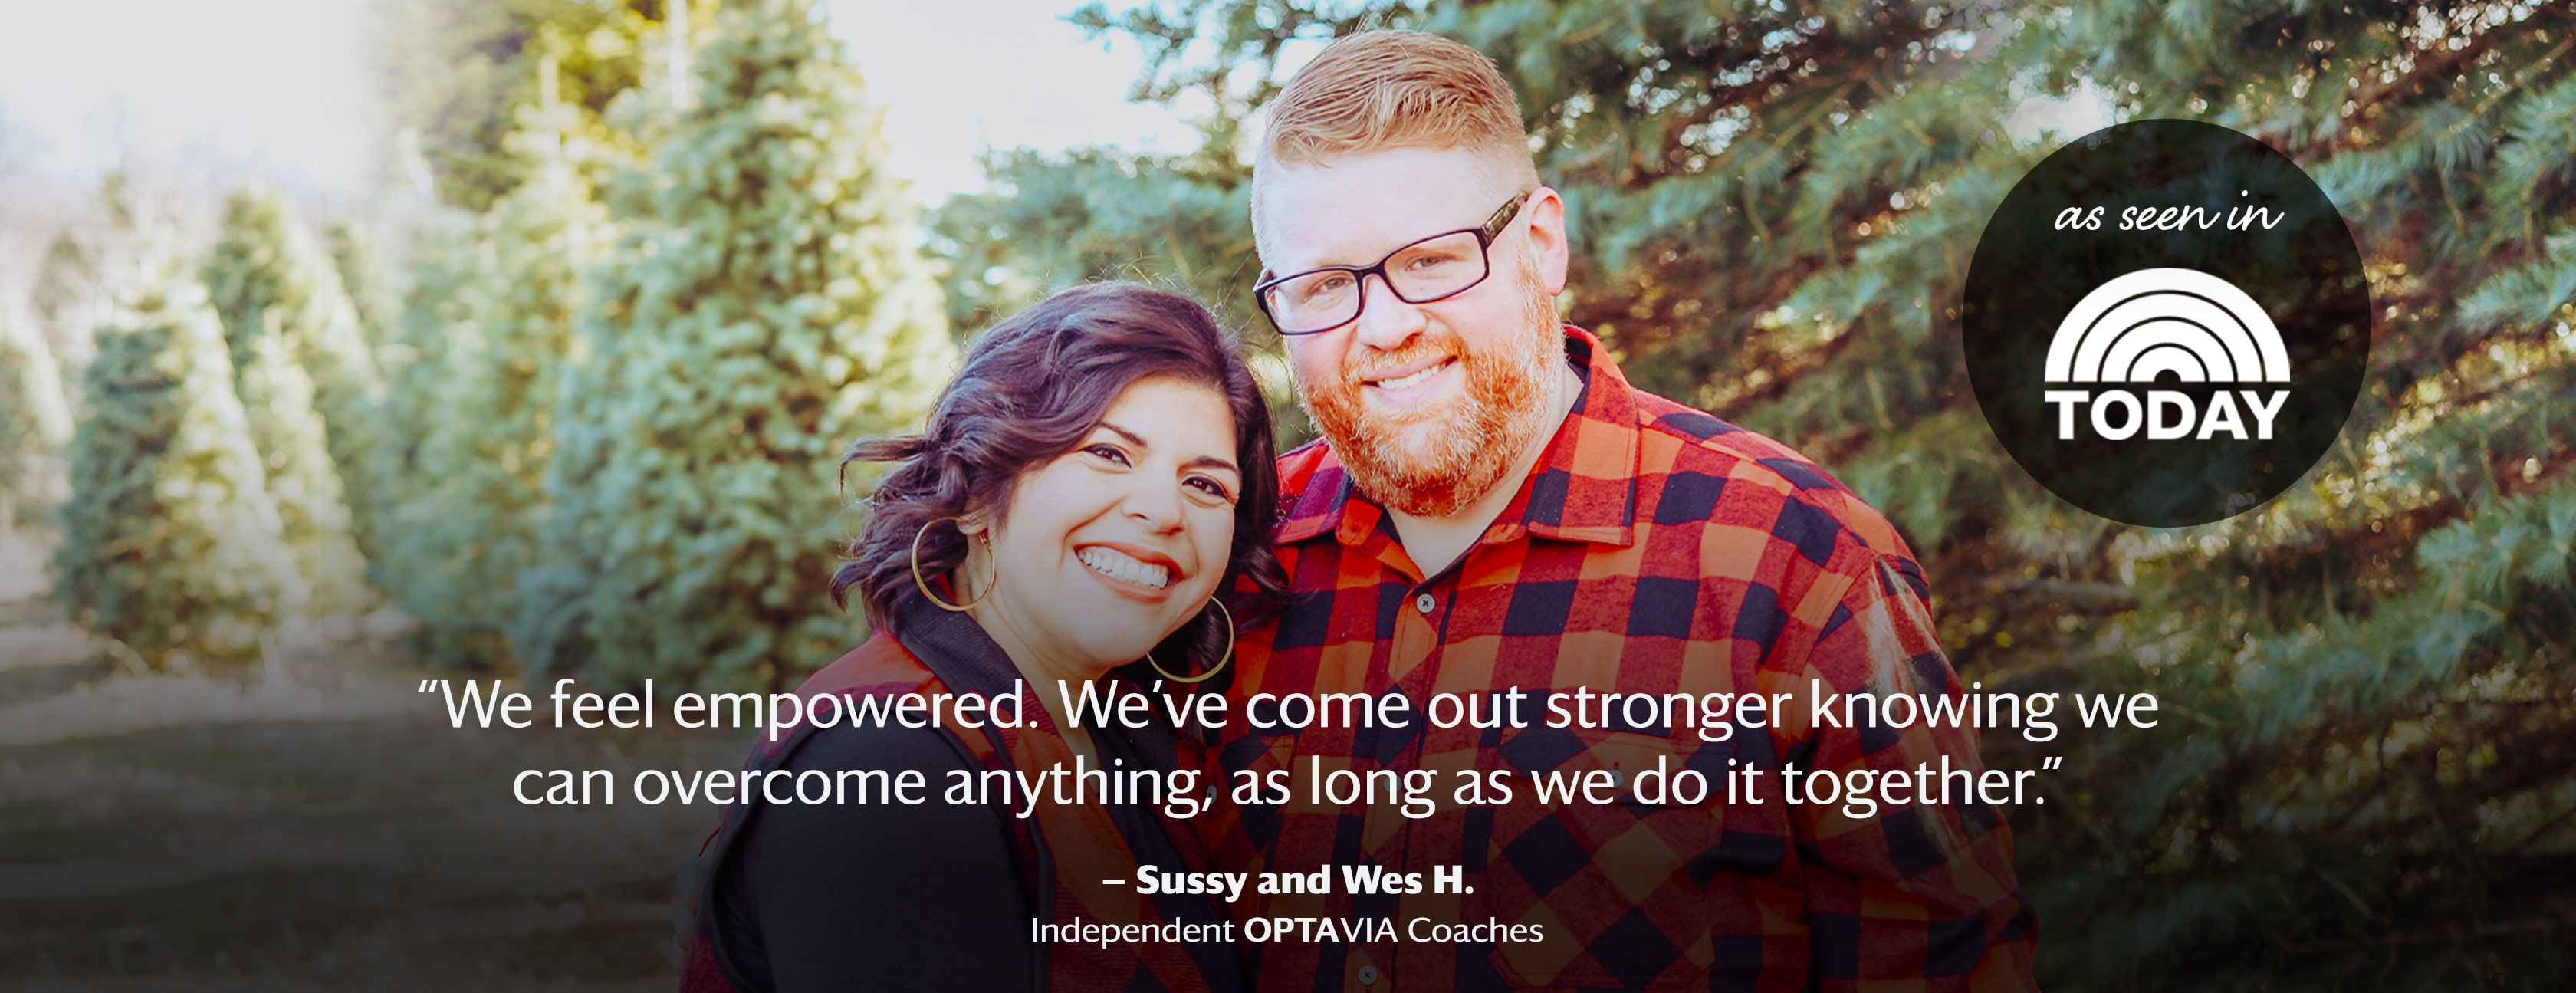 banner image of Sussy and Wes H. reads: We feel empowered. We've come out stronger knowing we can overcome anything, as long as we do it together. Sussy and Wes H., Independent OPTAVIA Coaches.